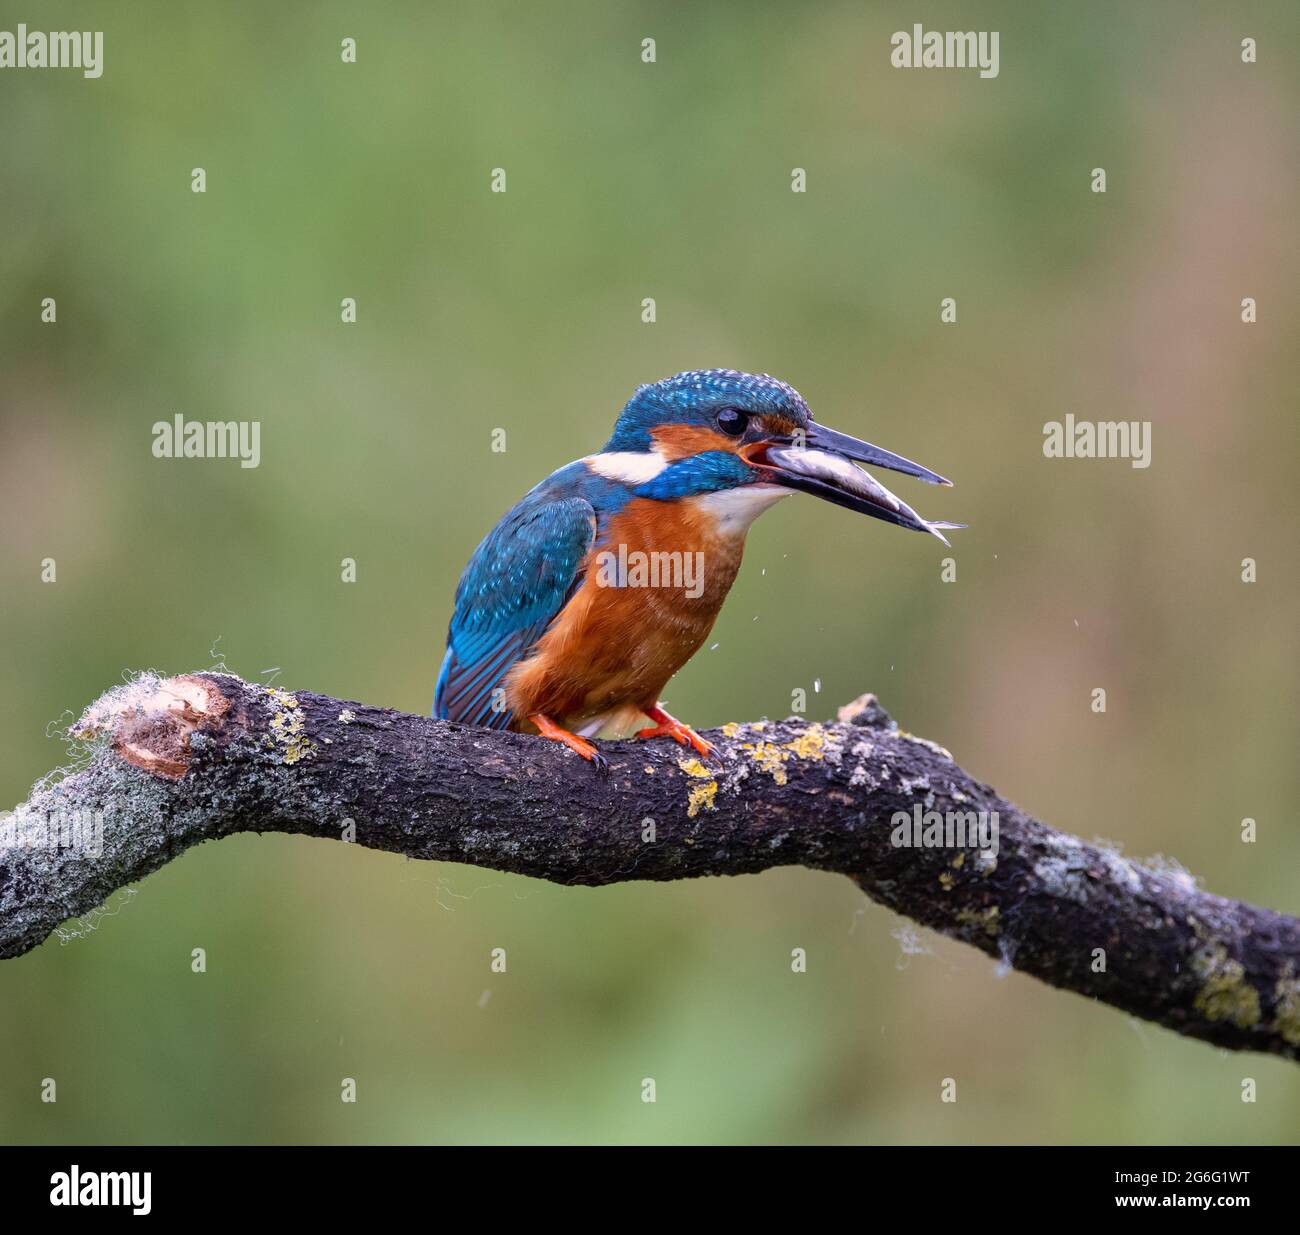 Kingfishers in the UK countryside Stock Photo